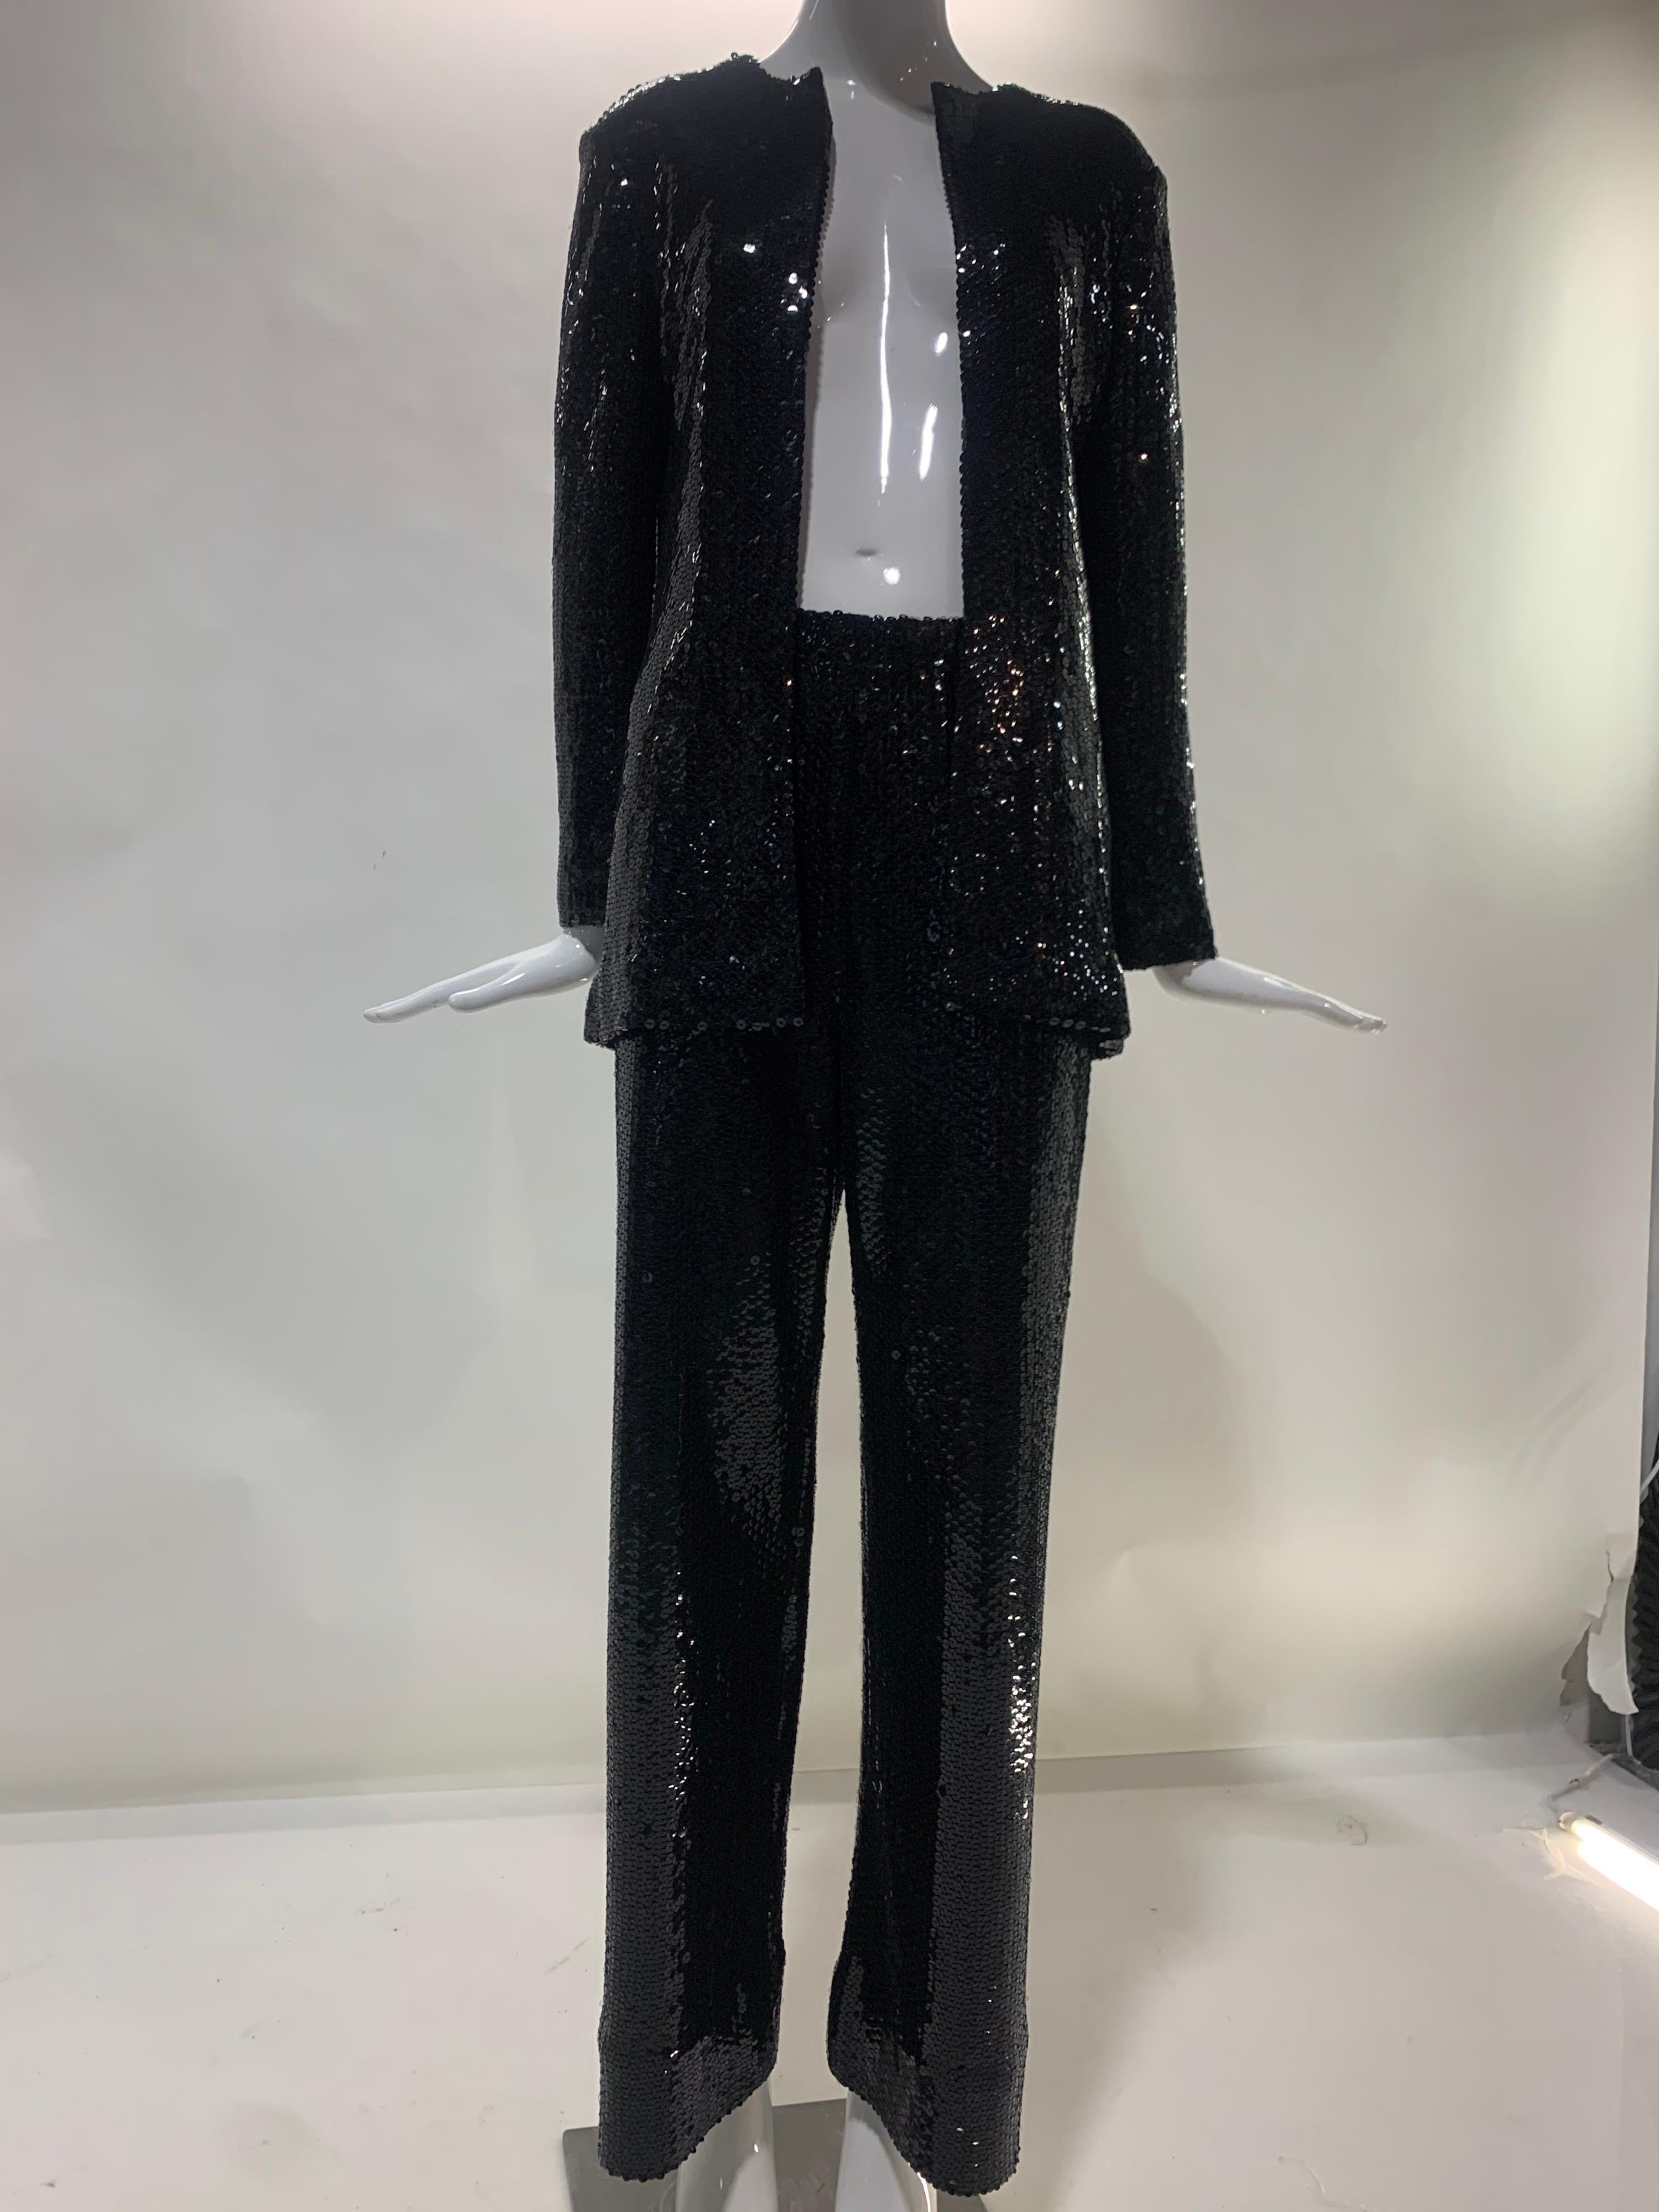 A fabulous 1970s Halston black solid sequin pant suit on matte jersey, This classic Halston look made Liza Minnelli famous!  Get your Glam on!  New, never worn. Size 8. 